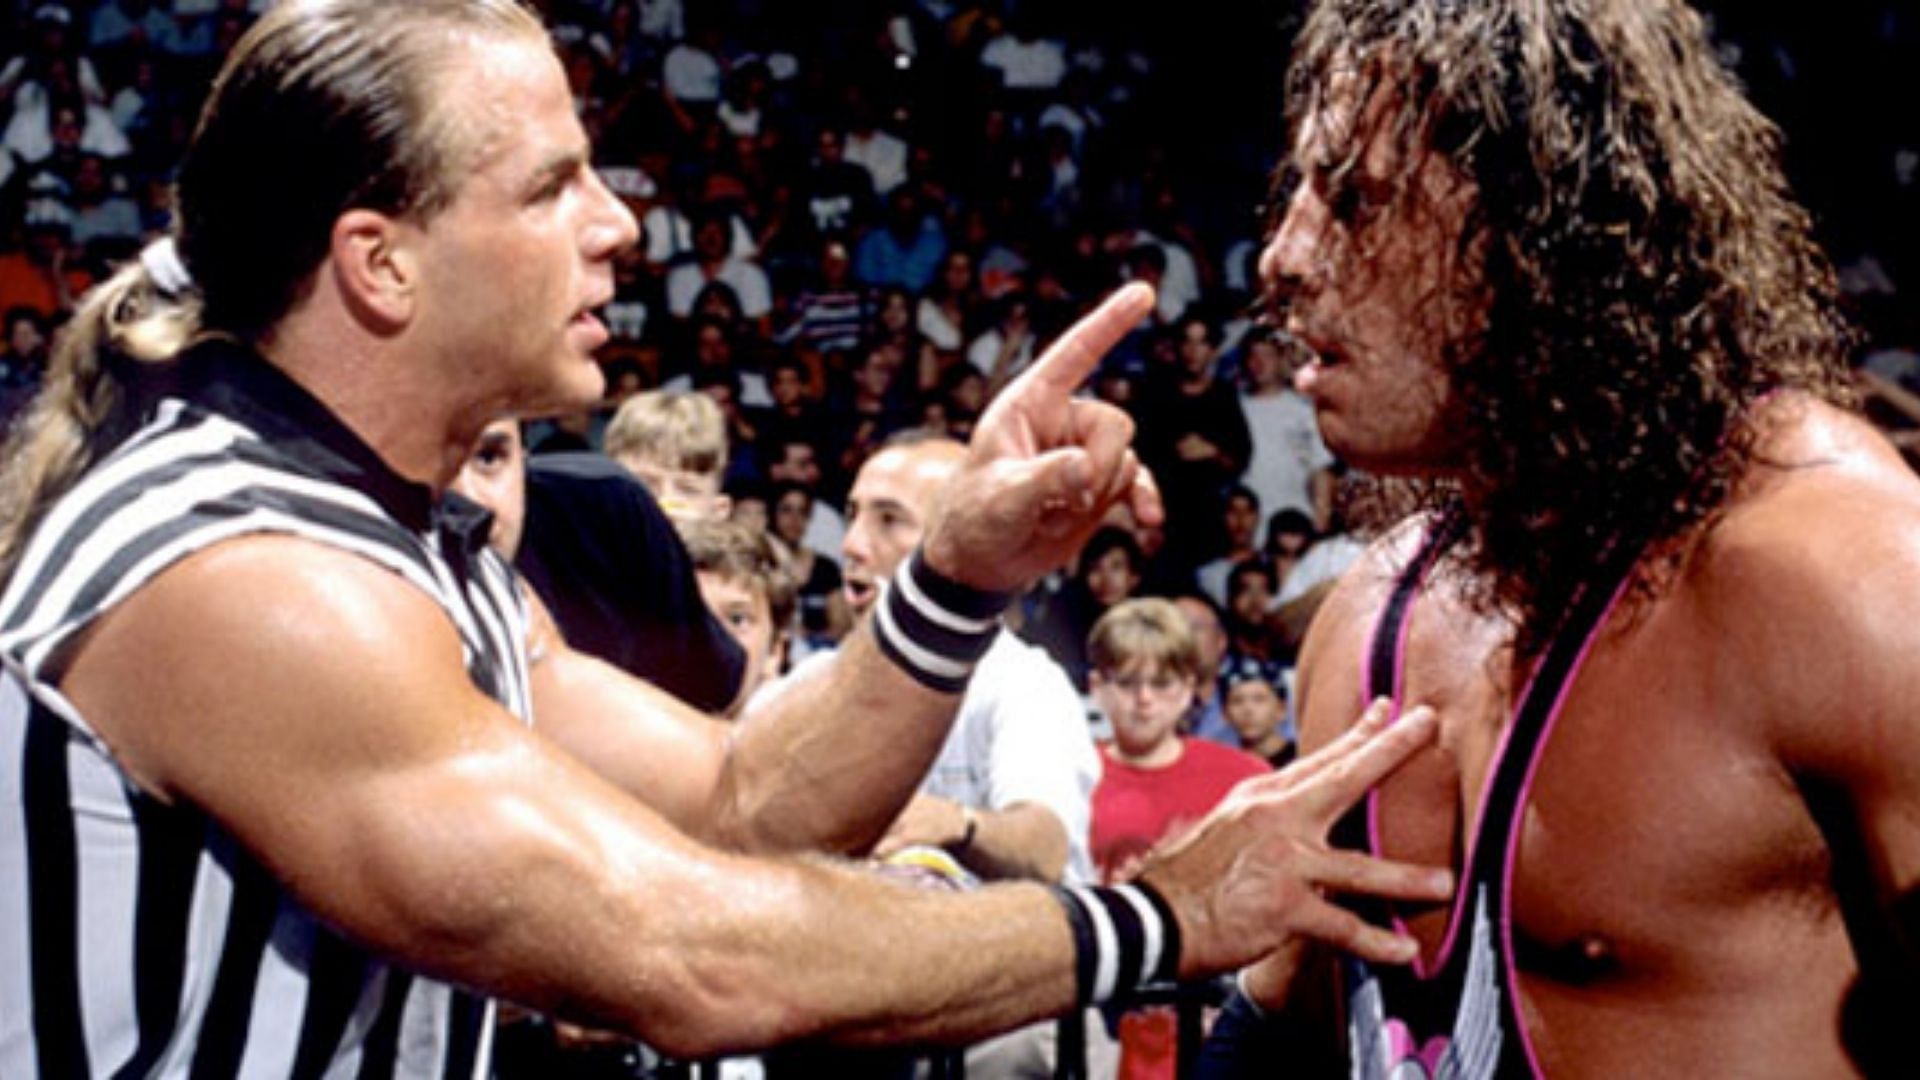 Shawn Michaels (left) and Bret Hart (right).